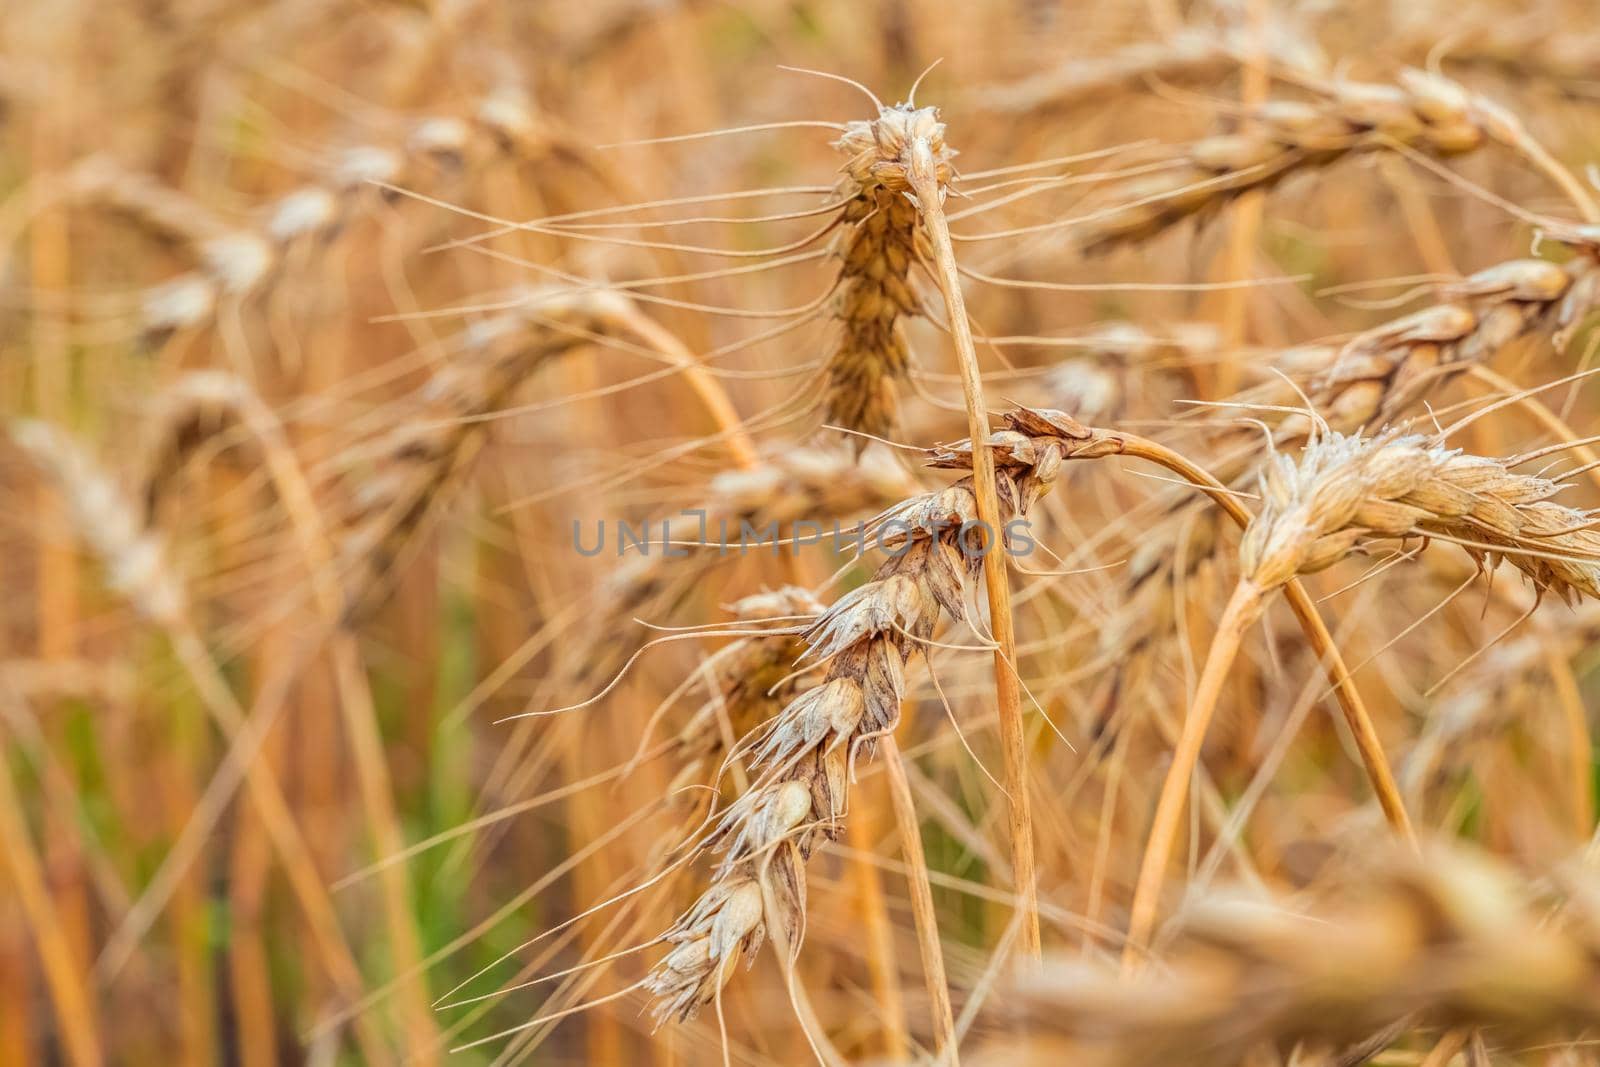 Golden Cereal field with ears of wheat,Agriculture farm and farming concept.Harvest.Wheat field.Rural Scenery.Ripening ears.Rancho harvest Concept.Ripe ears of wheat.Cereal crop.Bread, rye and grain by YevgeniySam